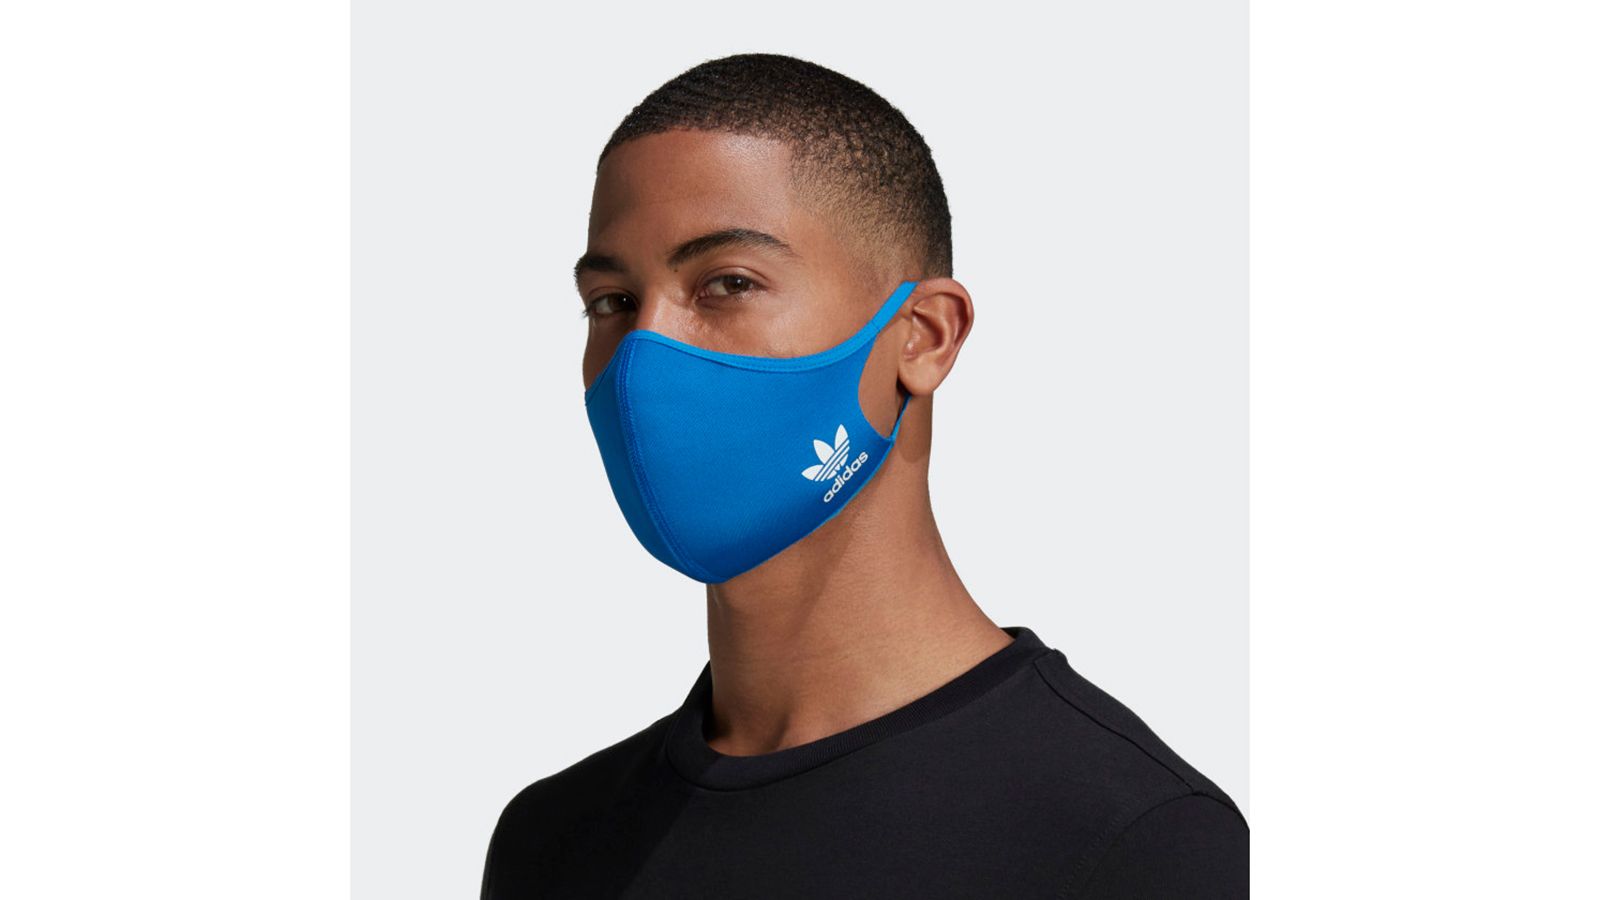 Sports Face Mask: Why it's a Better Choice for those Staying